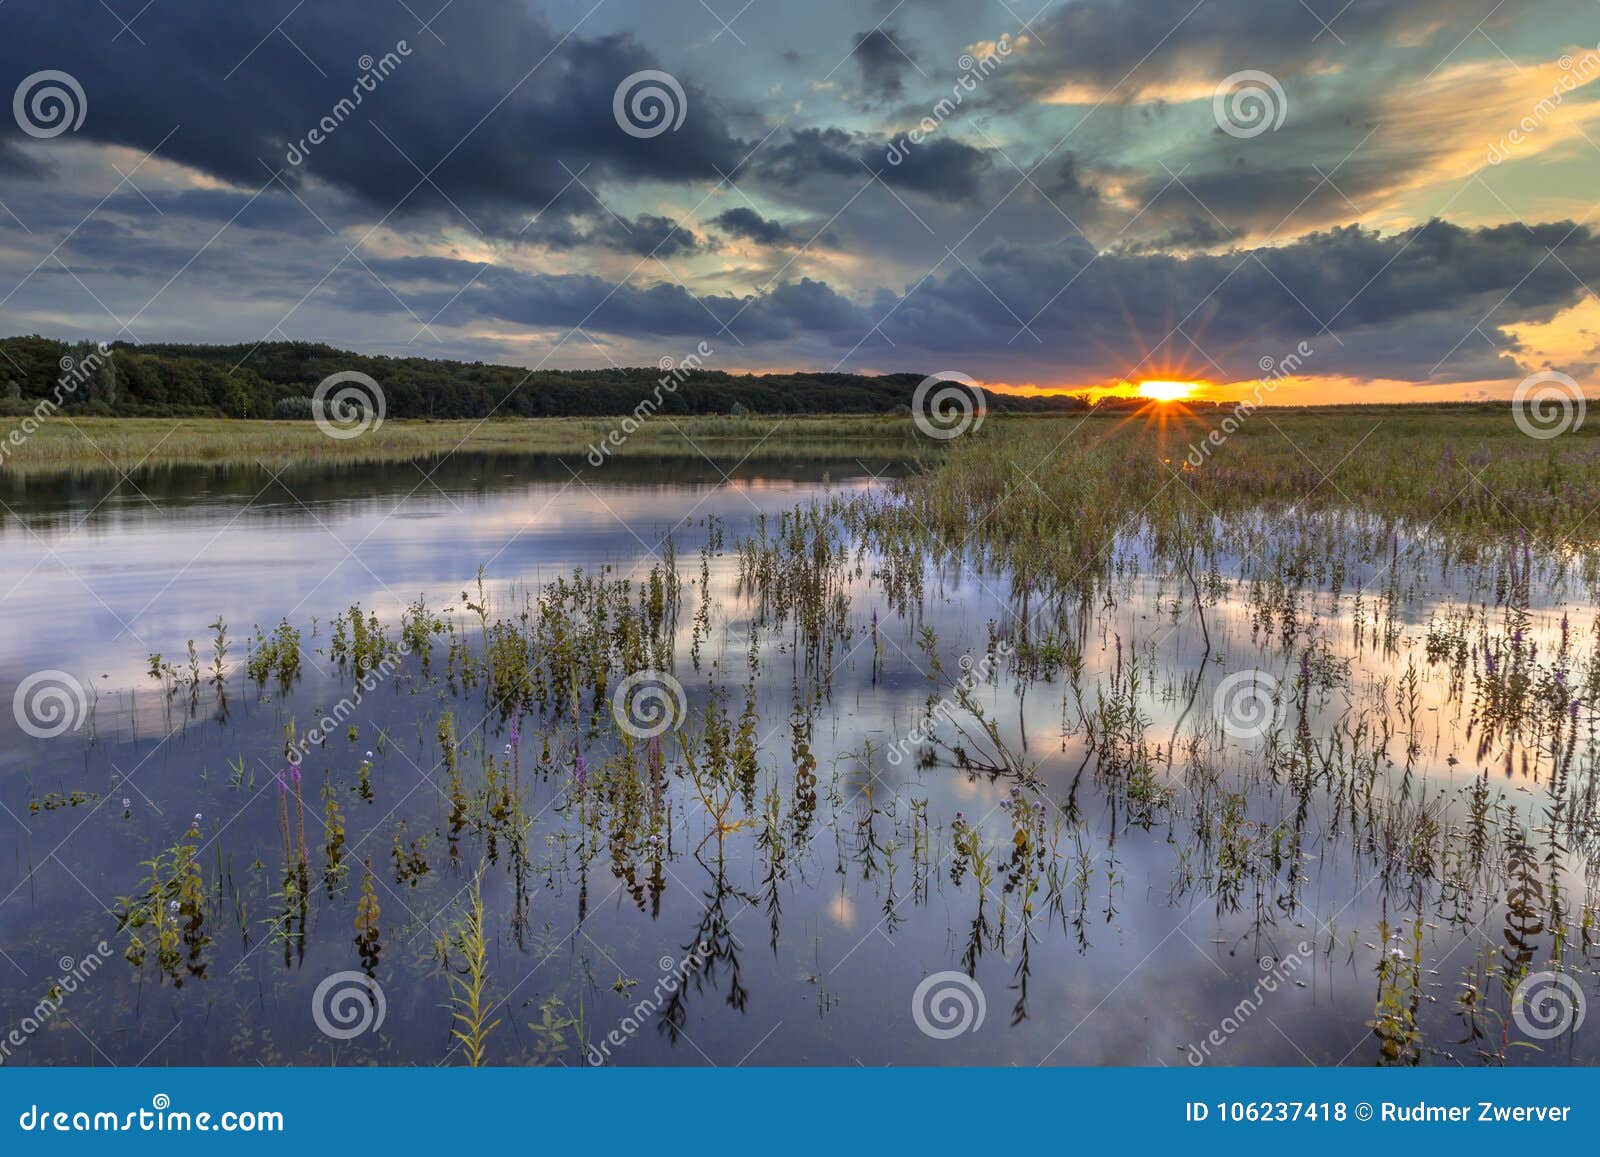 dark river foreland landscape image with setting sun